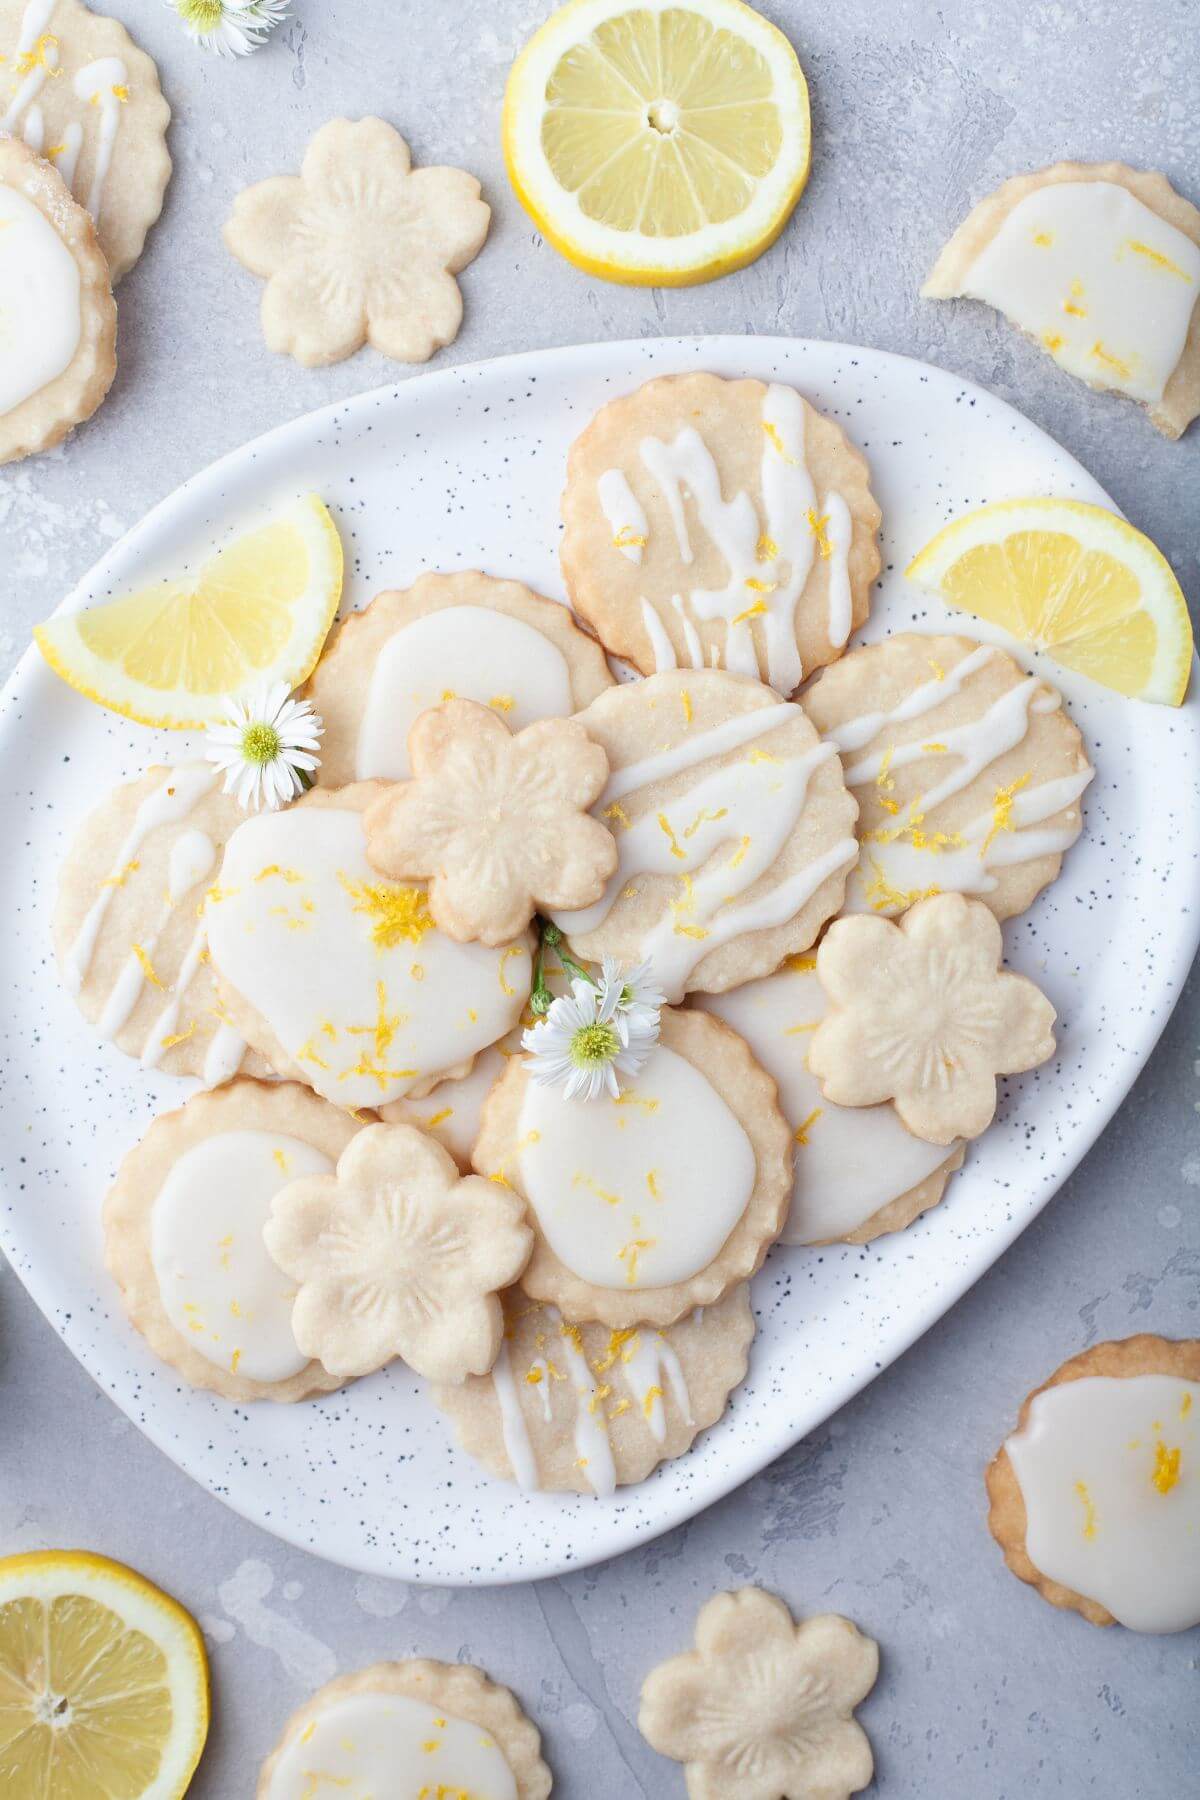 A cookie platter is surrounded by decorated cookies and lemons.